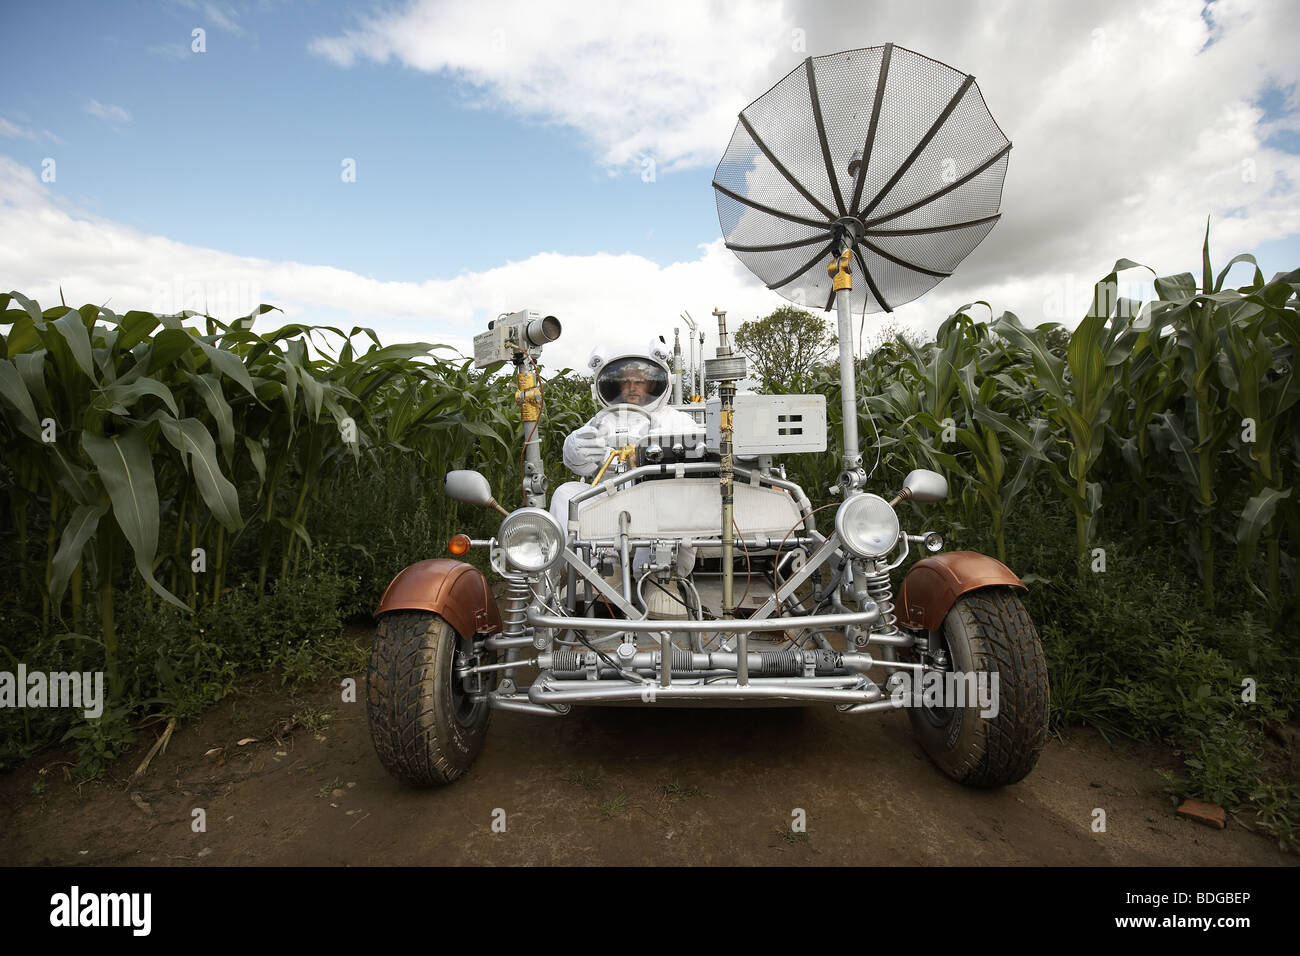 Replica Lunar Rover buggy at the York Maze built for the pop group Jamiroquai's Runaway video with astronaut in spacesuit. Stock Photo